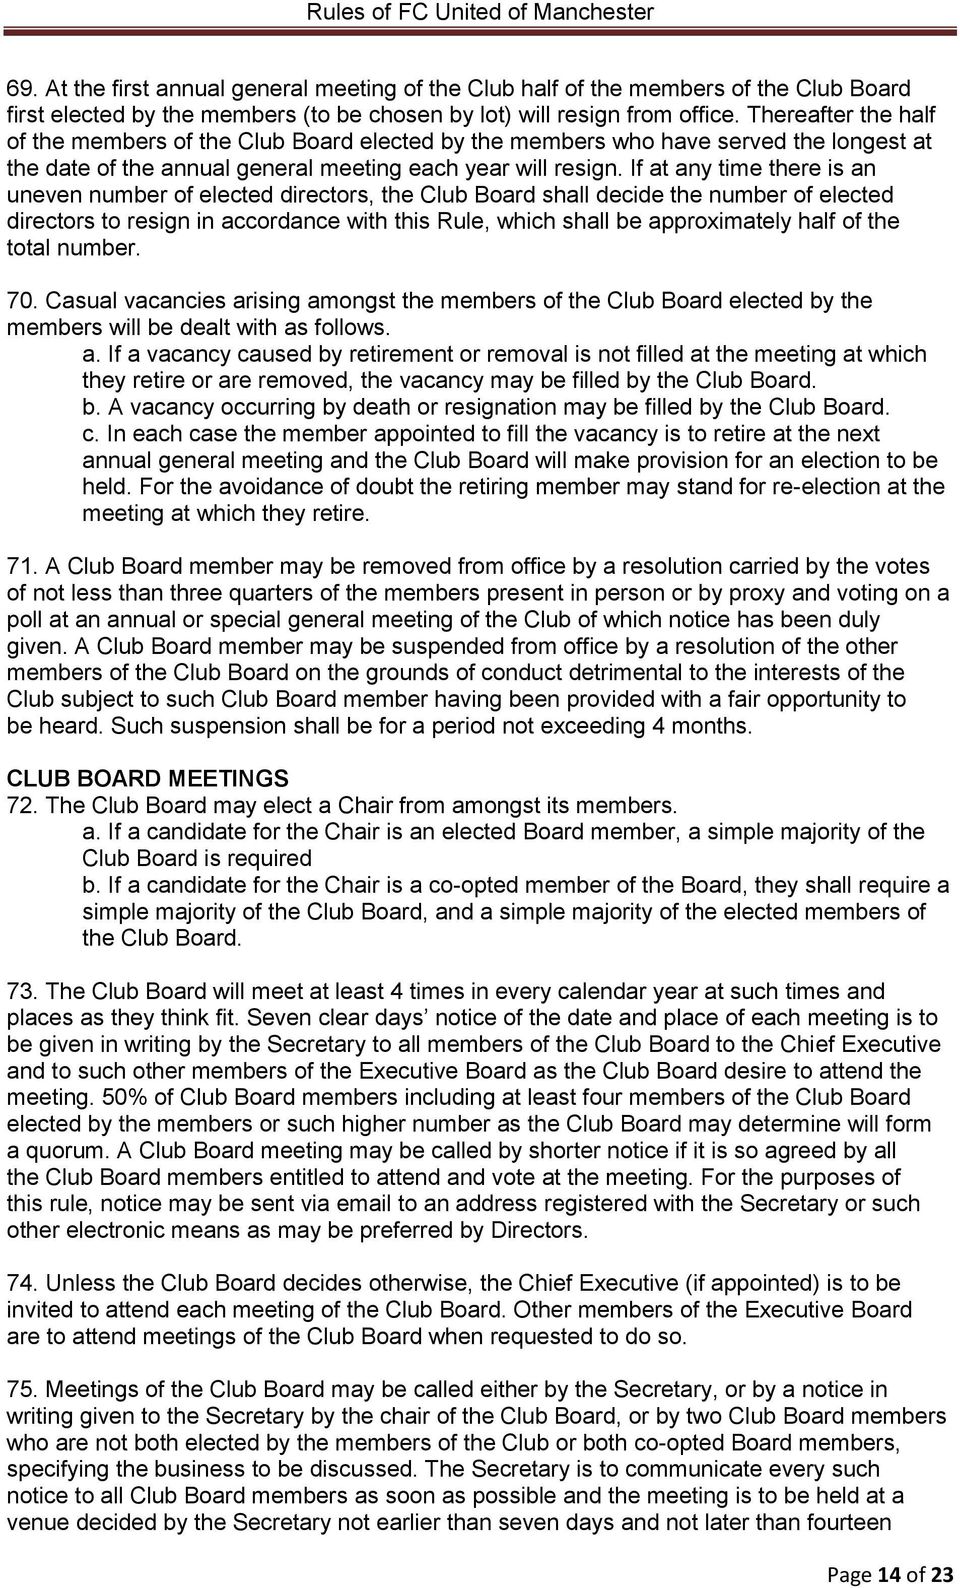 If at any time there is an uneven number of elected directors, the Club Board shall decide the number of elected directors to resign in accordance with this Rule, which shall be approximately half of